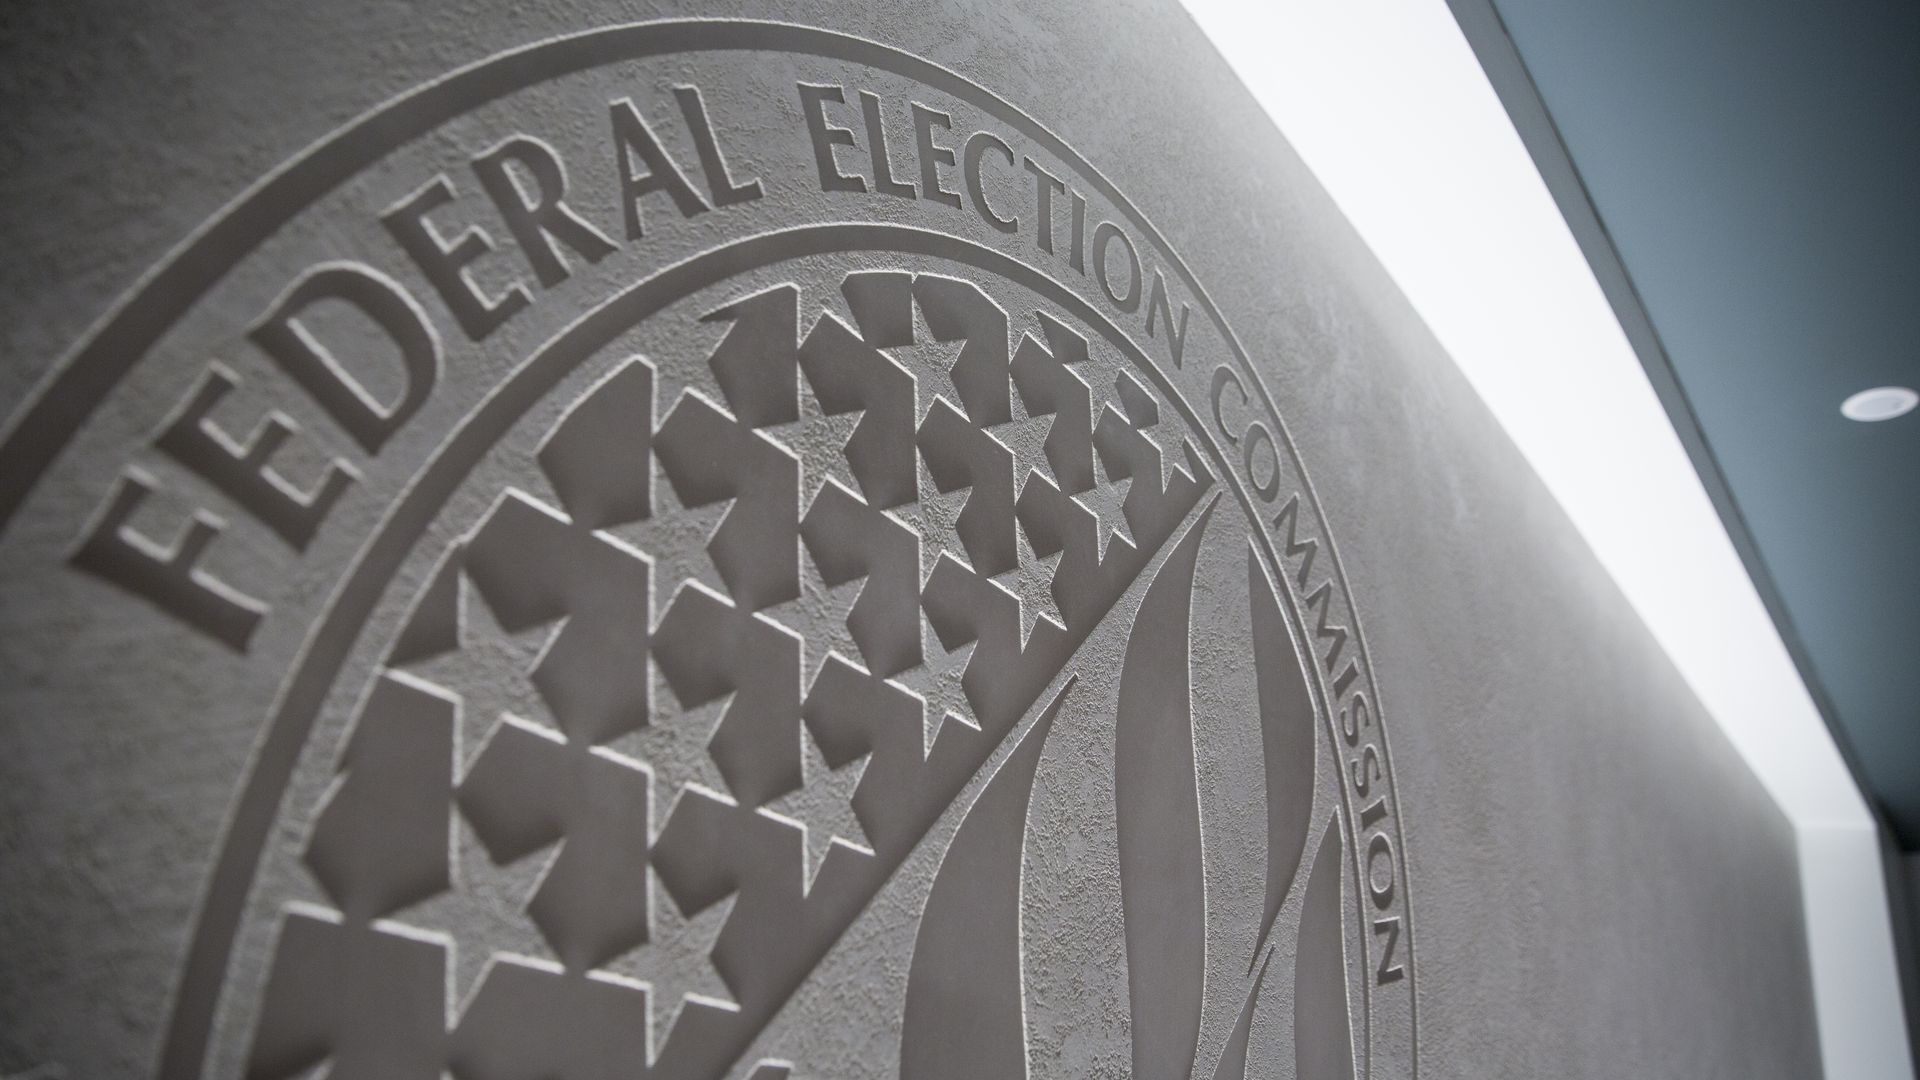 A photo of the seal of the Federal Election Commission